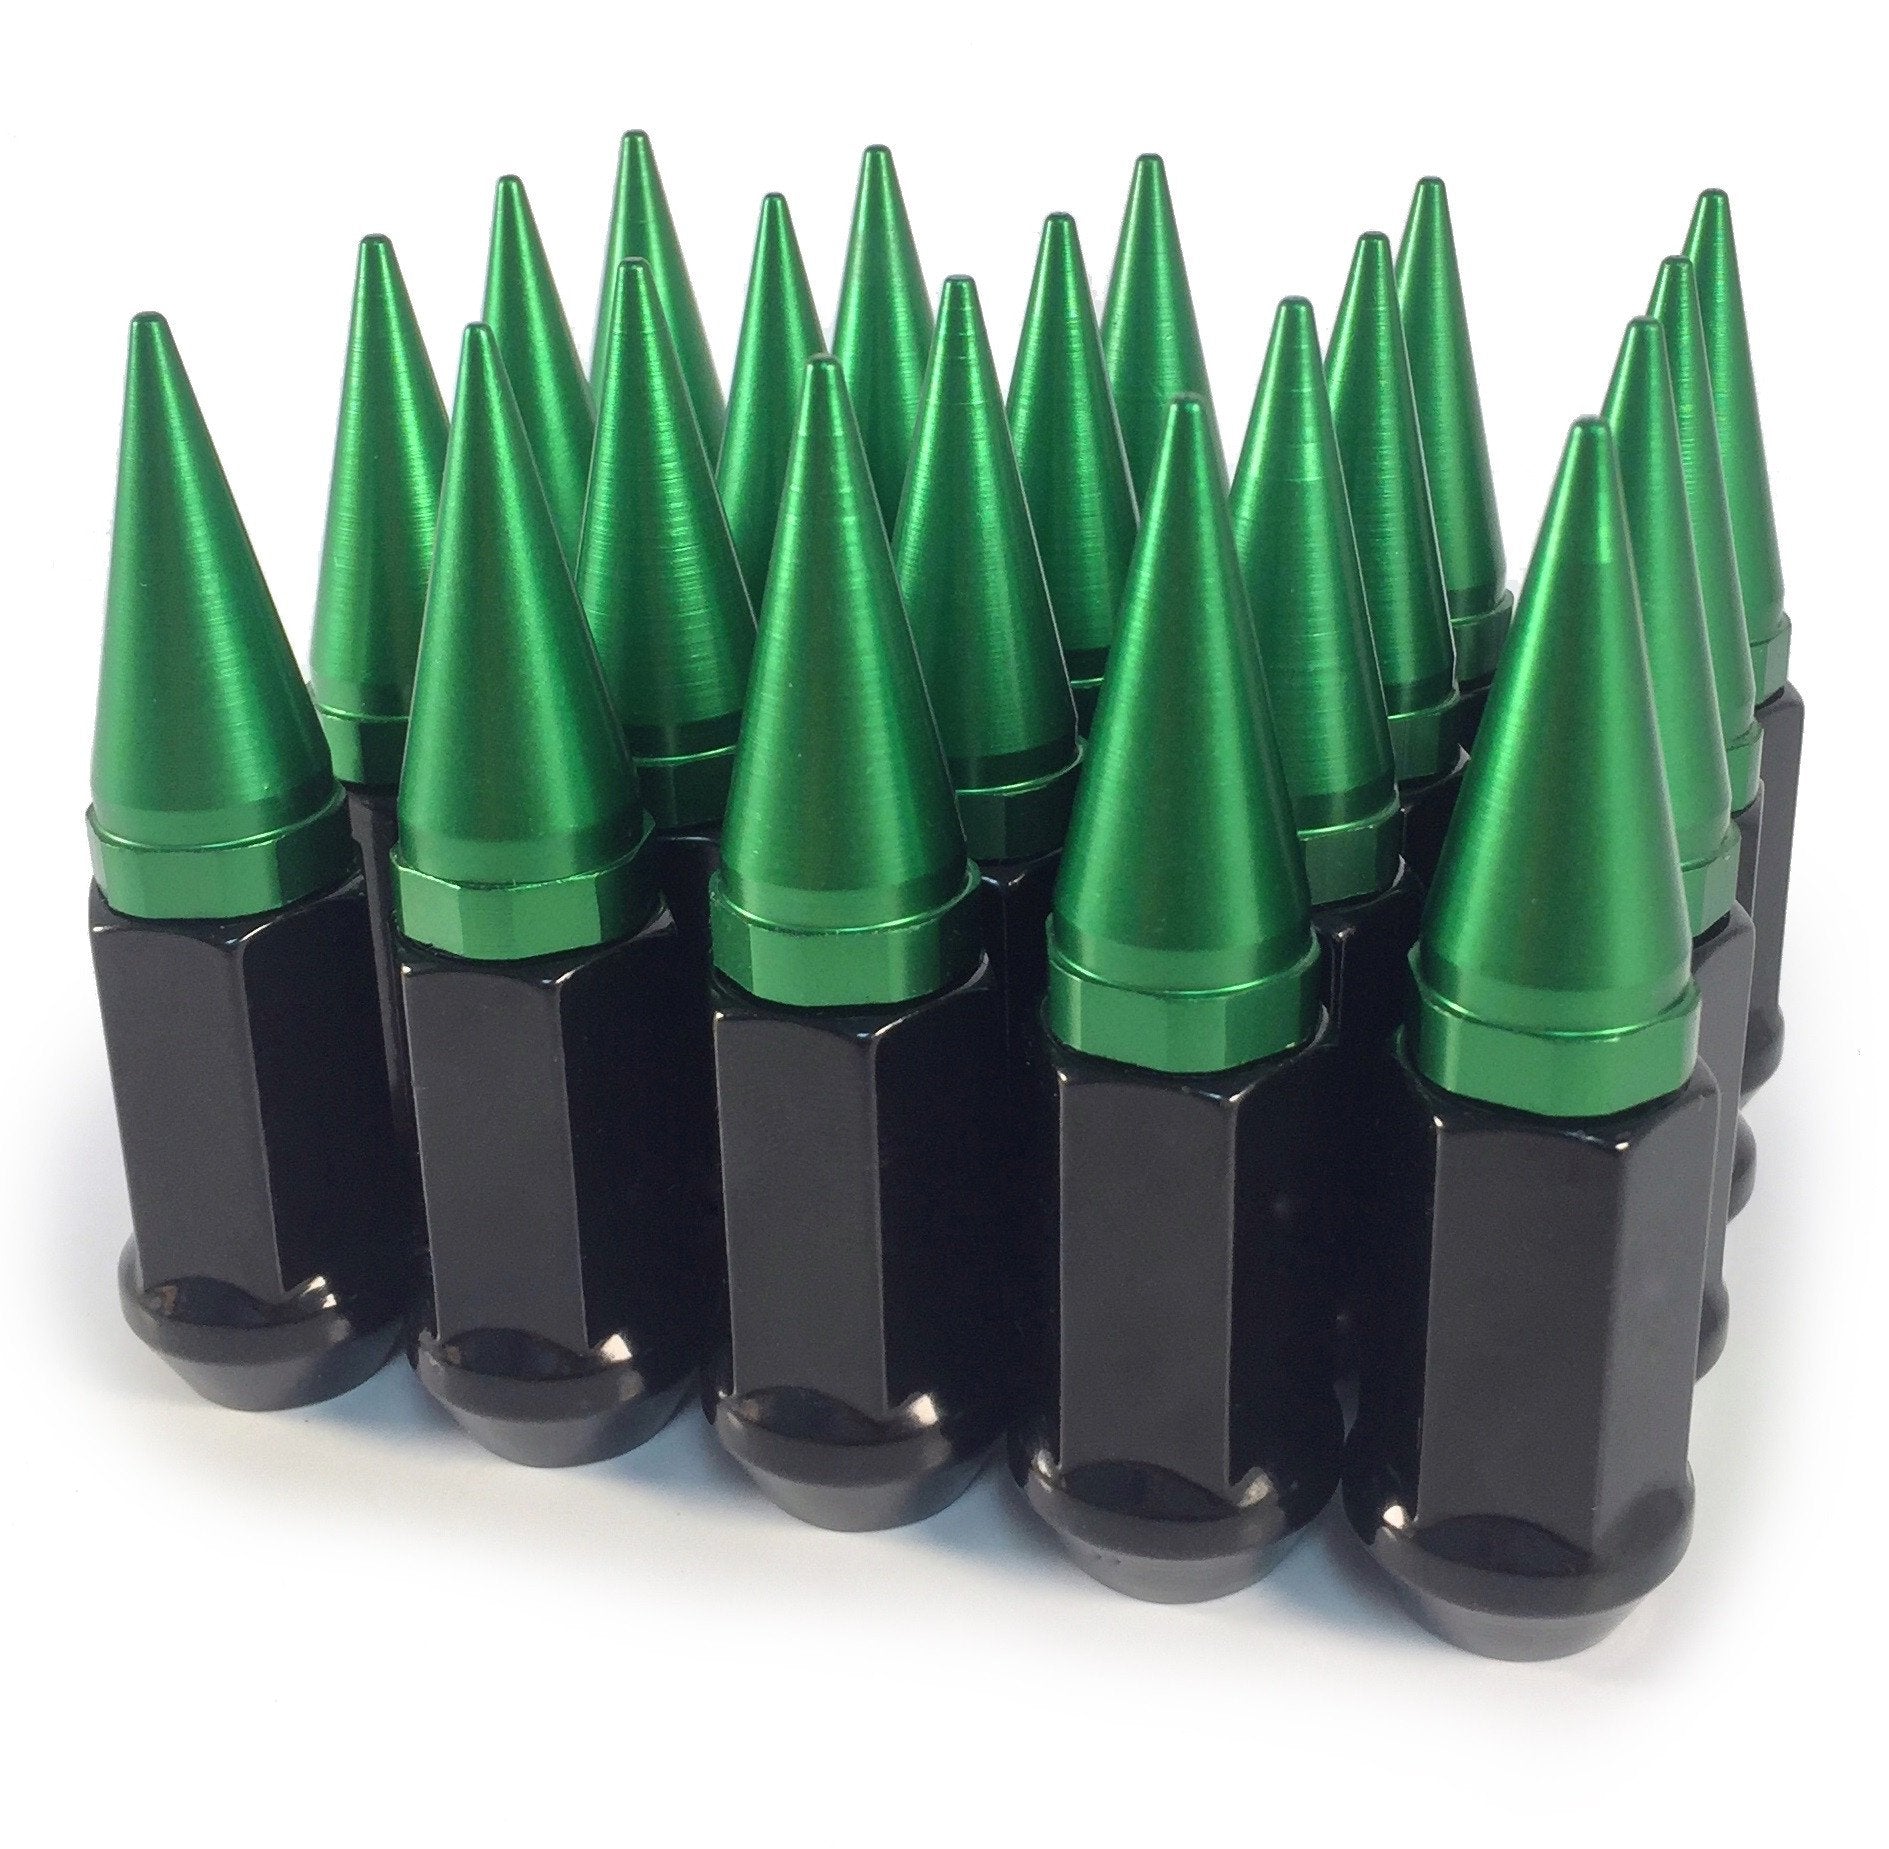 24 BLACK / GREEN SPIKED EXTENDED LUG NUTS 12x1.5 OFFROAD WHEELS TACOMA TUNDRA 4RUNNER - Wheel Adapters USA